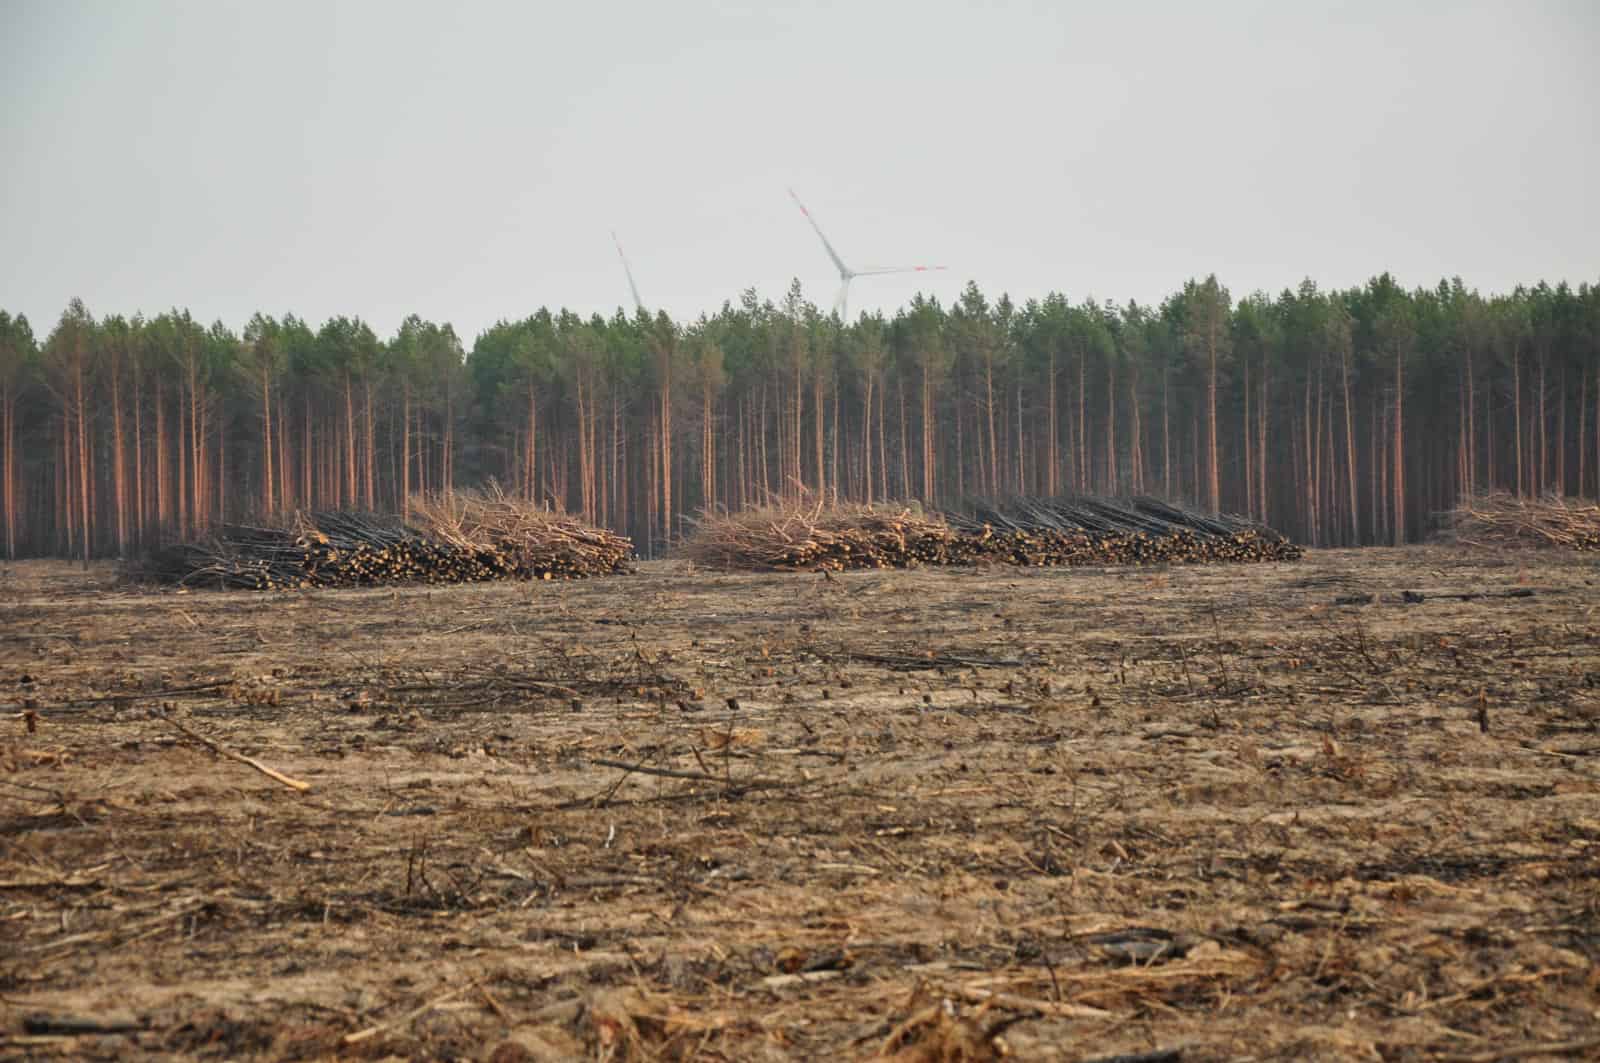 Call for a radical change to stop deforestation once and for all